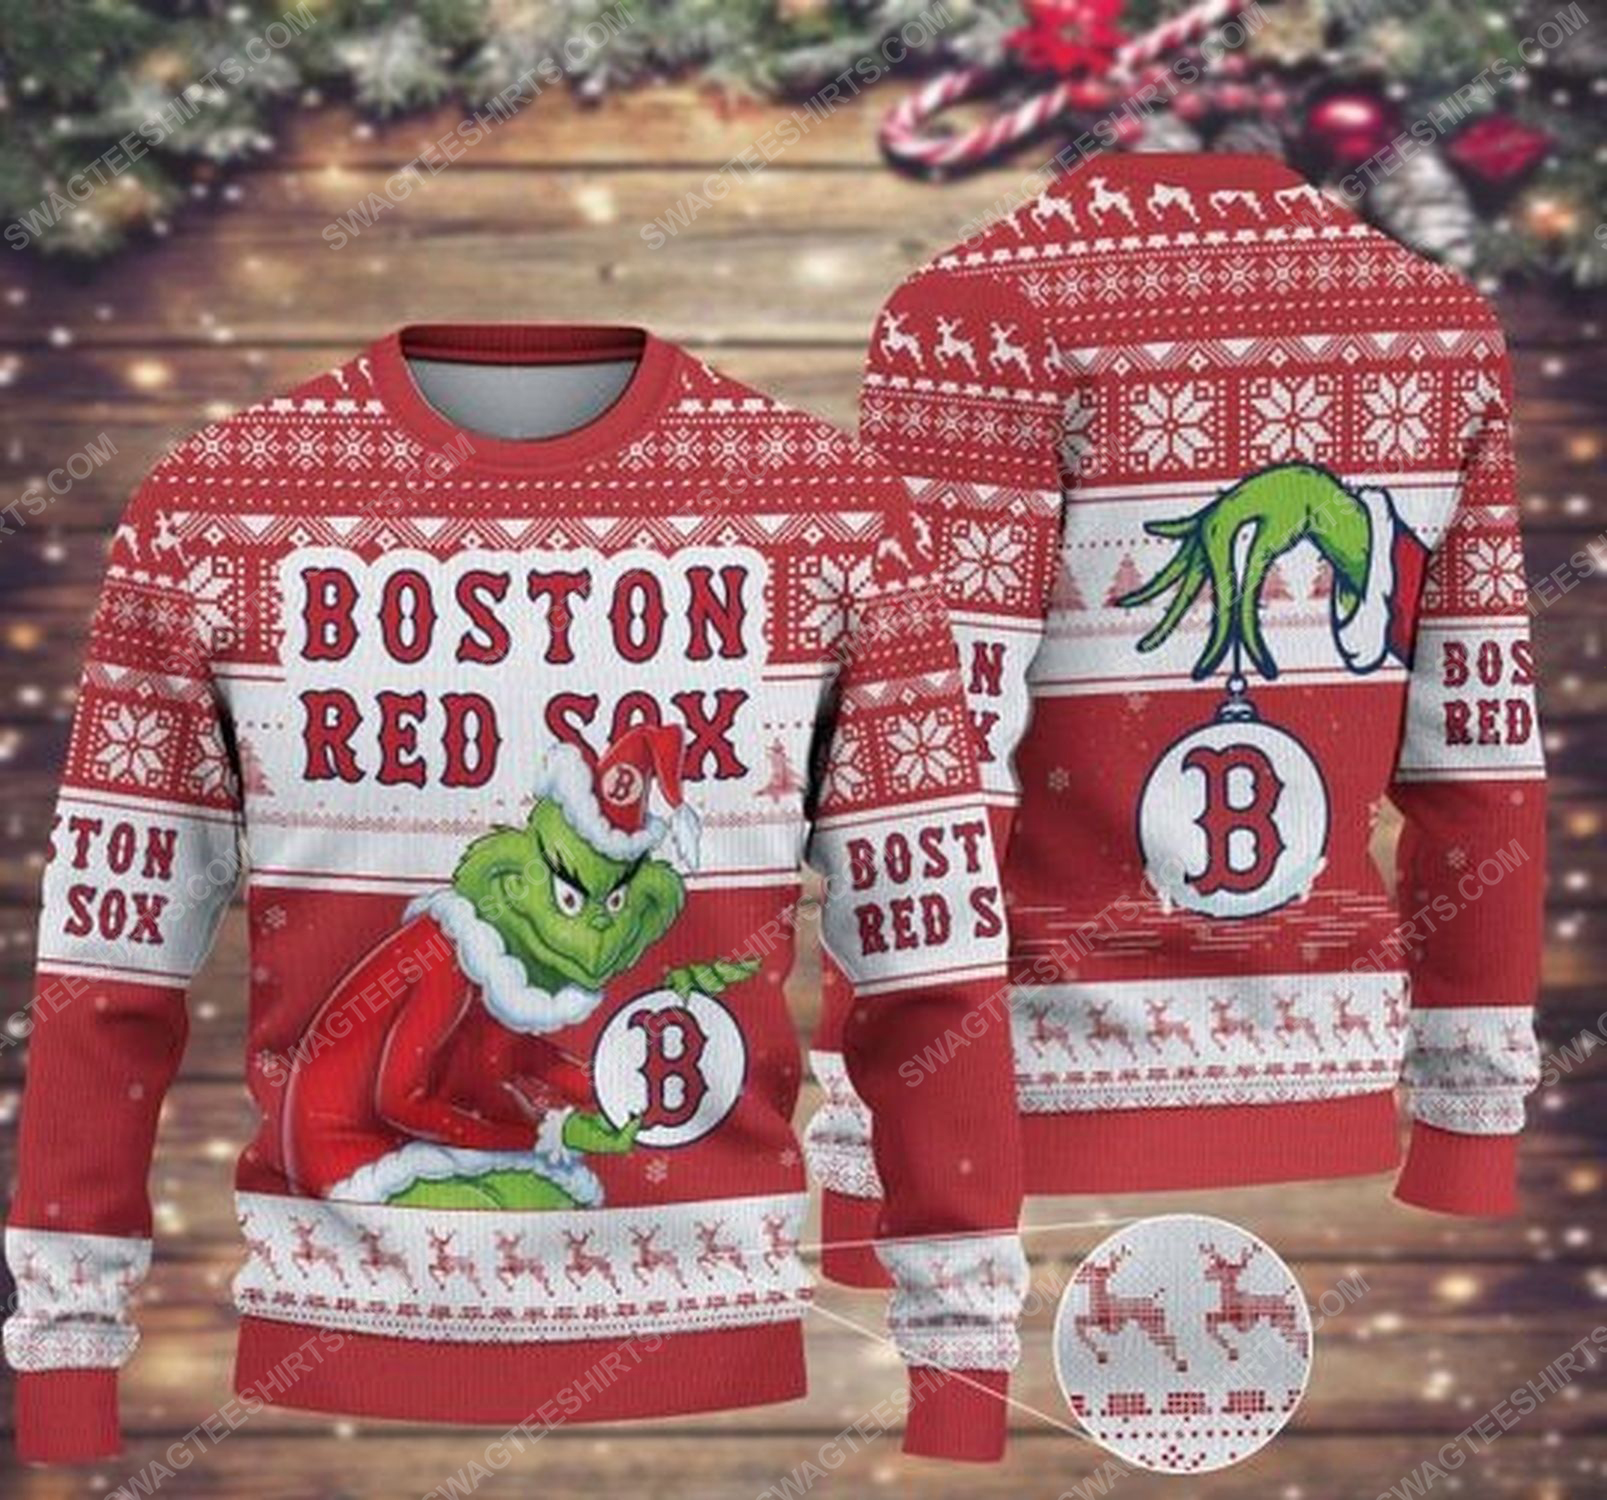 Red Sox Womens Apparel 3D Baby Groot Grinch Christmas Boston Red Sox Gift  Ideas - Personalized Gifts: Family, Sports, Occasions, Trending